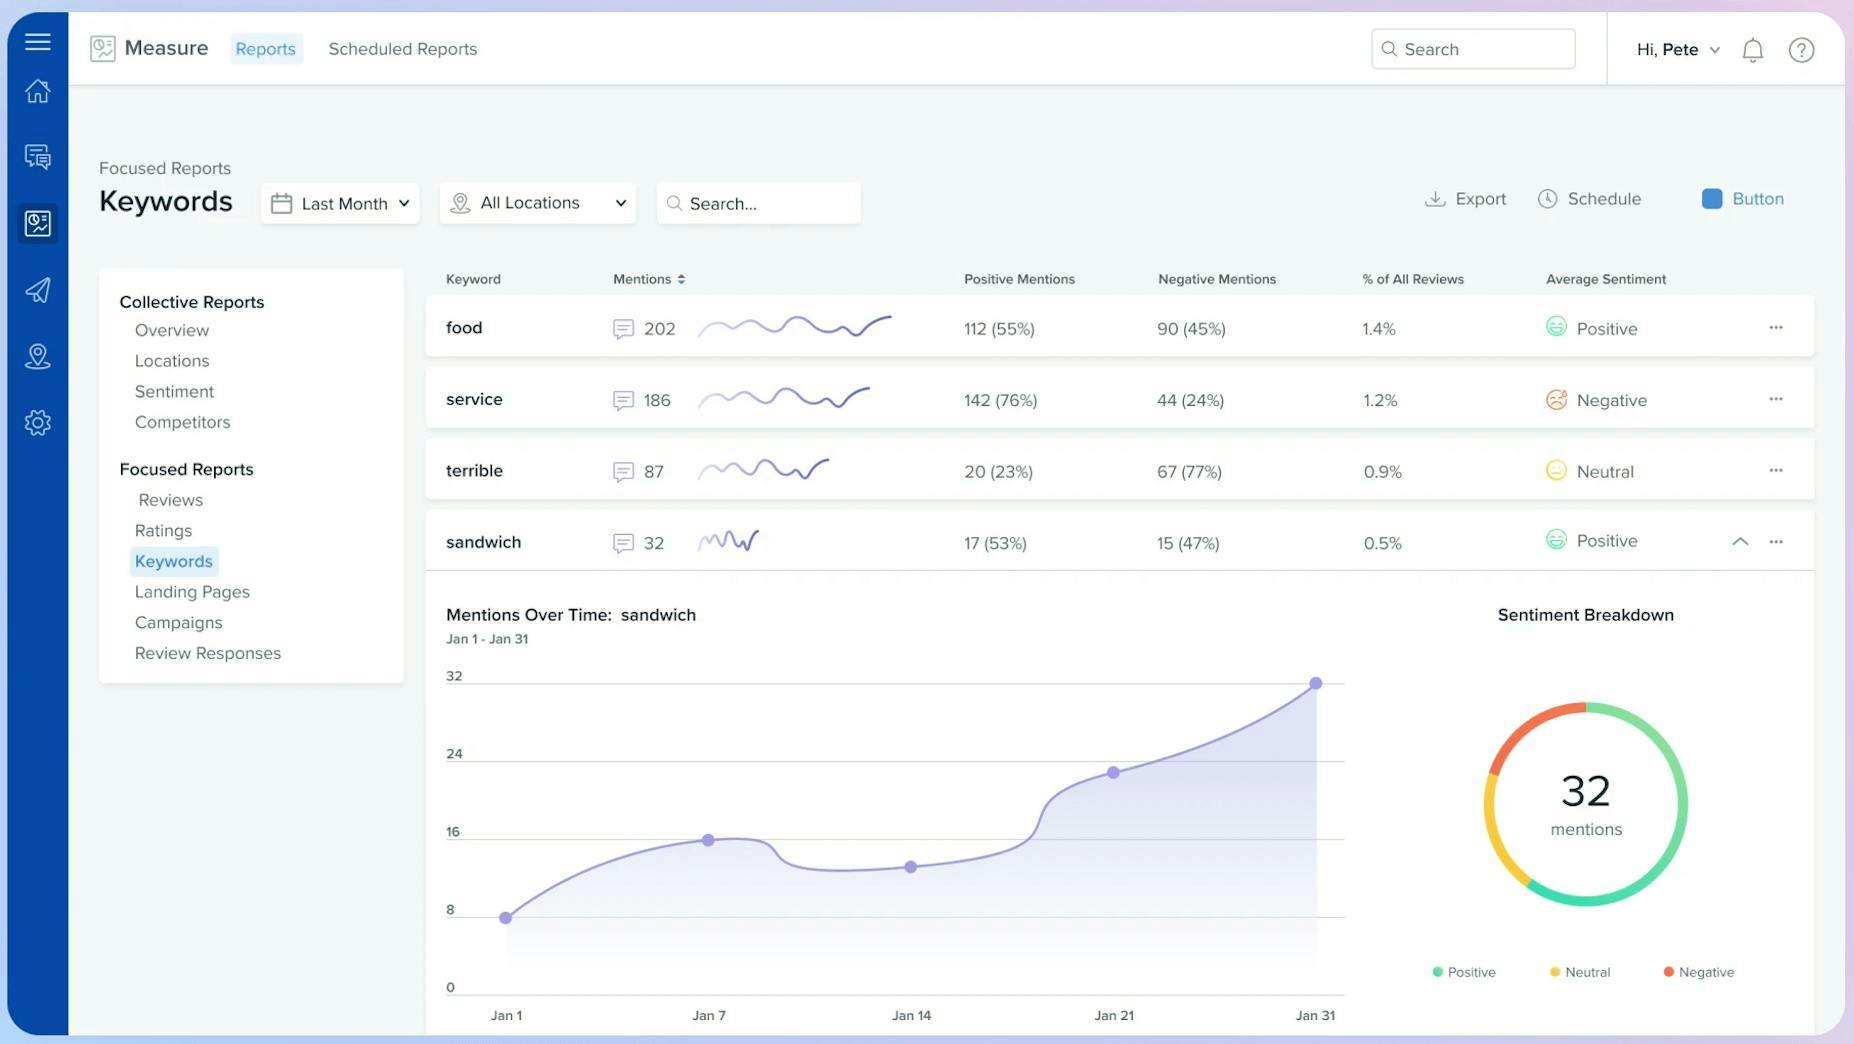 An image of one of the dashboards available in ReviewPush's reputation monitoring solution.